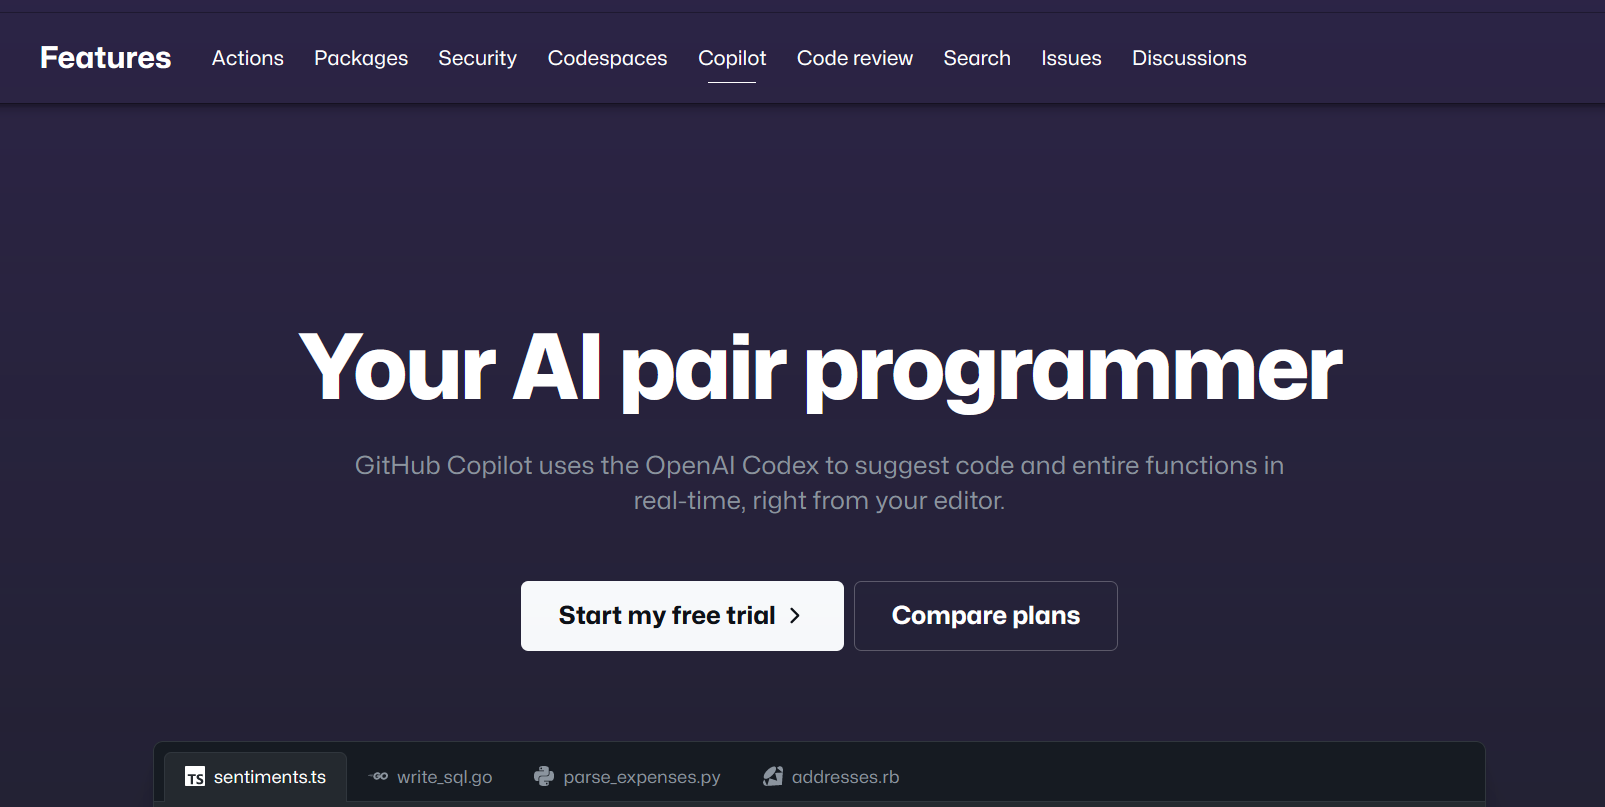 Start A Free Trial of GitHub Copilot